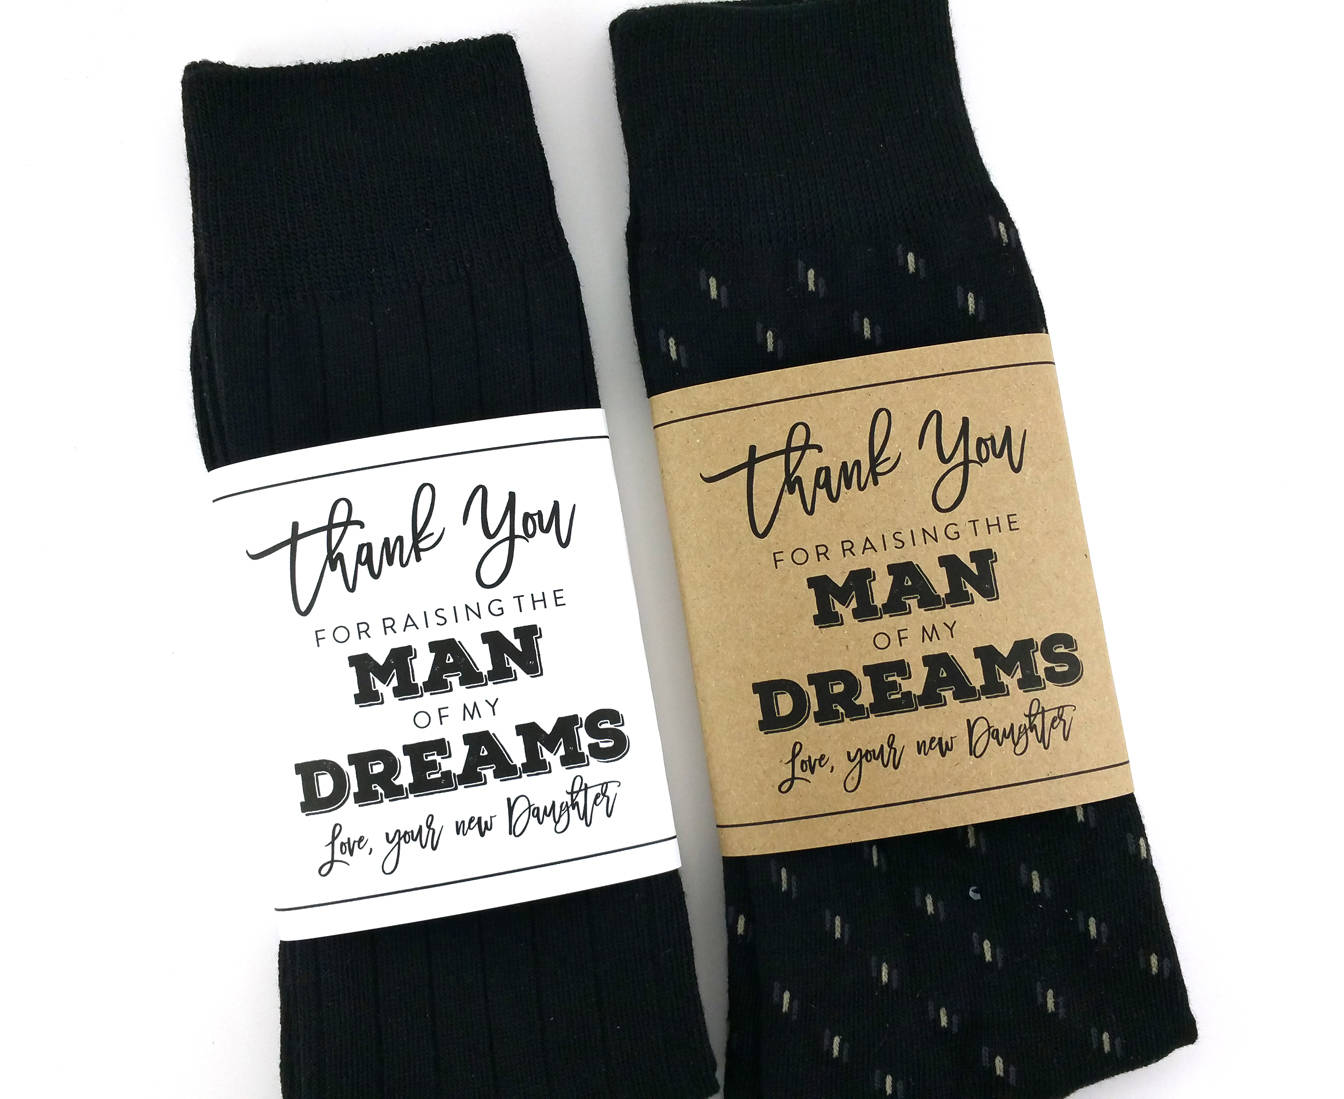 Thank You for Raising the Man of my Dreams Sock Wrapper | Etsy